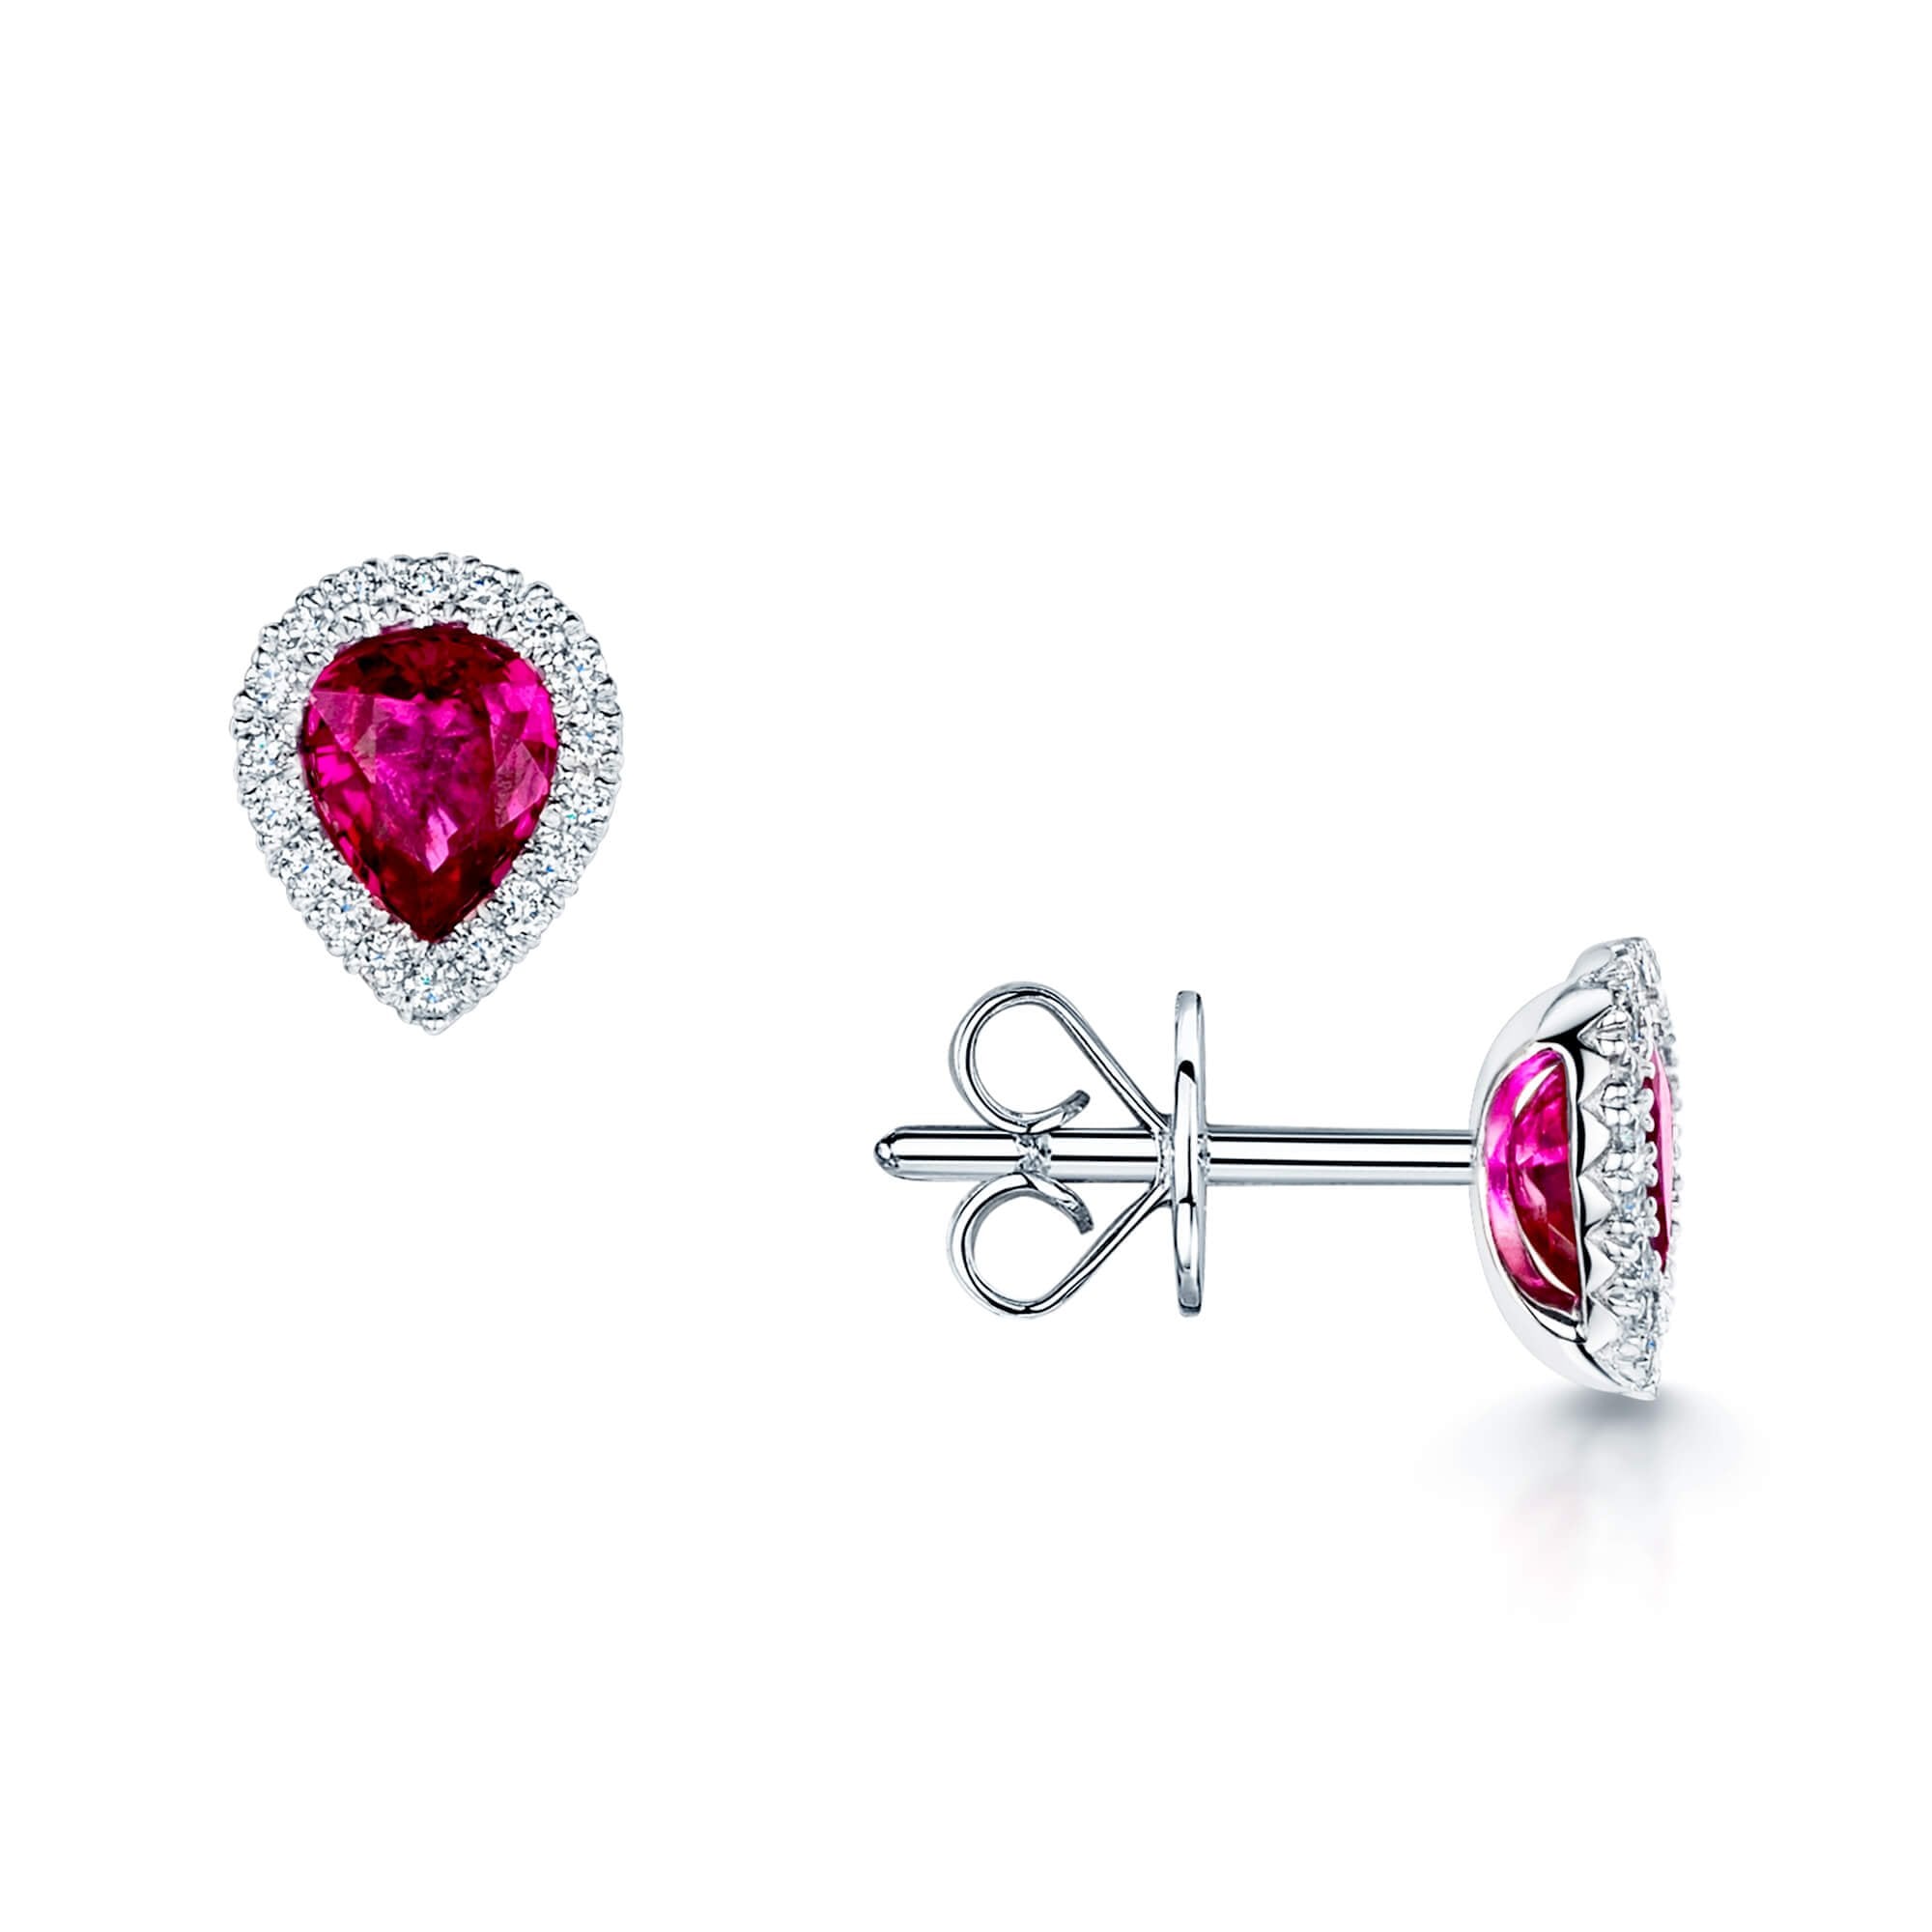 18ct White Gold Pear Cut Ruby & Diamond Halo Cluster Stud Earrings